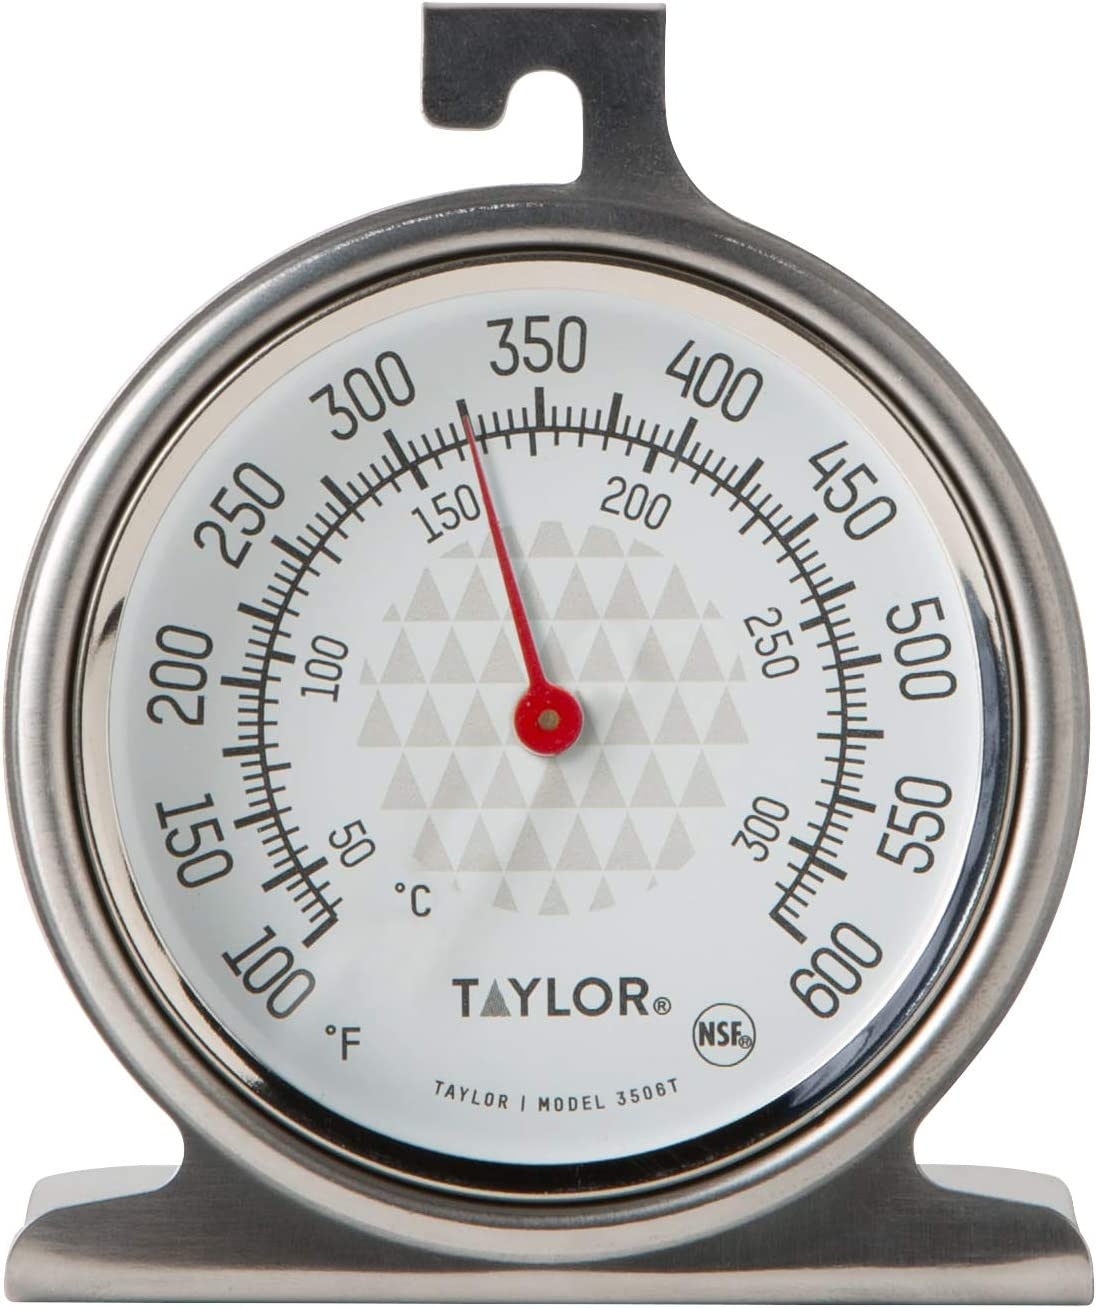 Taylor Precision Products Large 2.5 Inch Dial Kitchen Cooking Oven Thermometer Import To Shop ×Product customization General